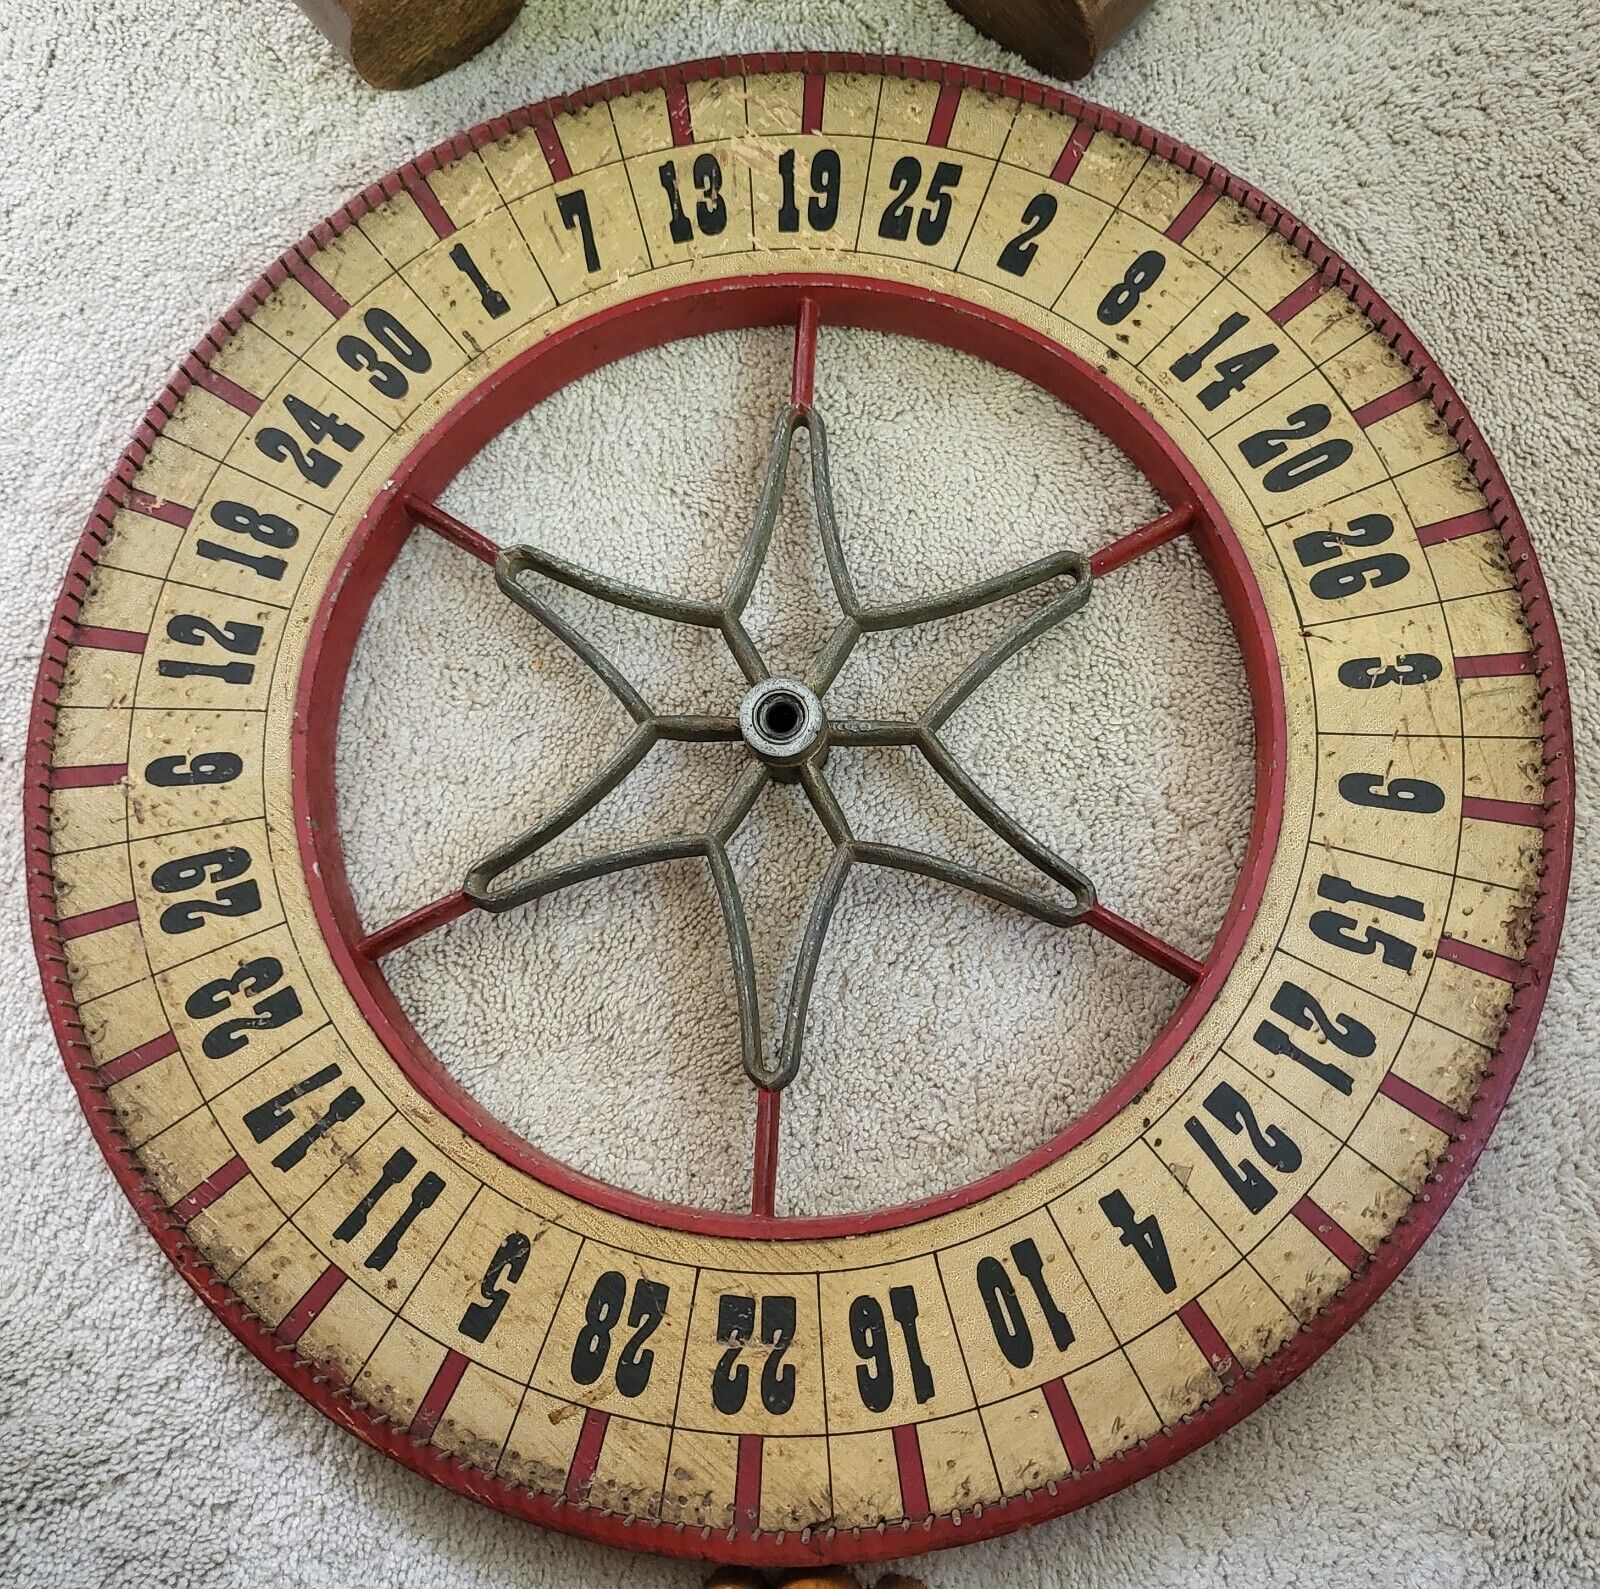 Antique Wooden Carnival/Circus Gaming Wheel All Original Game Of Chance